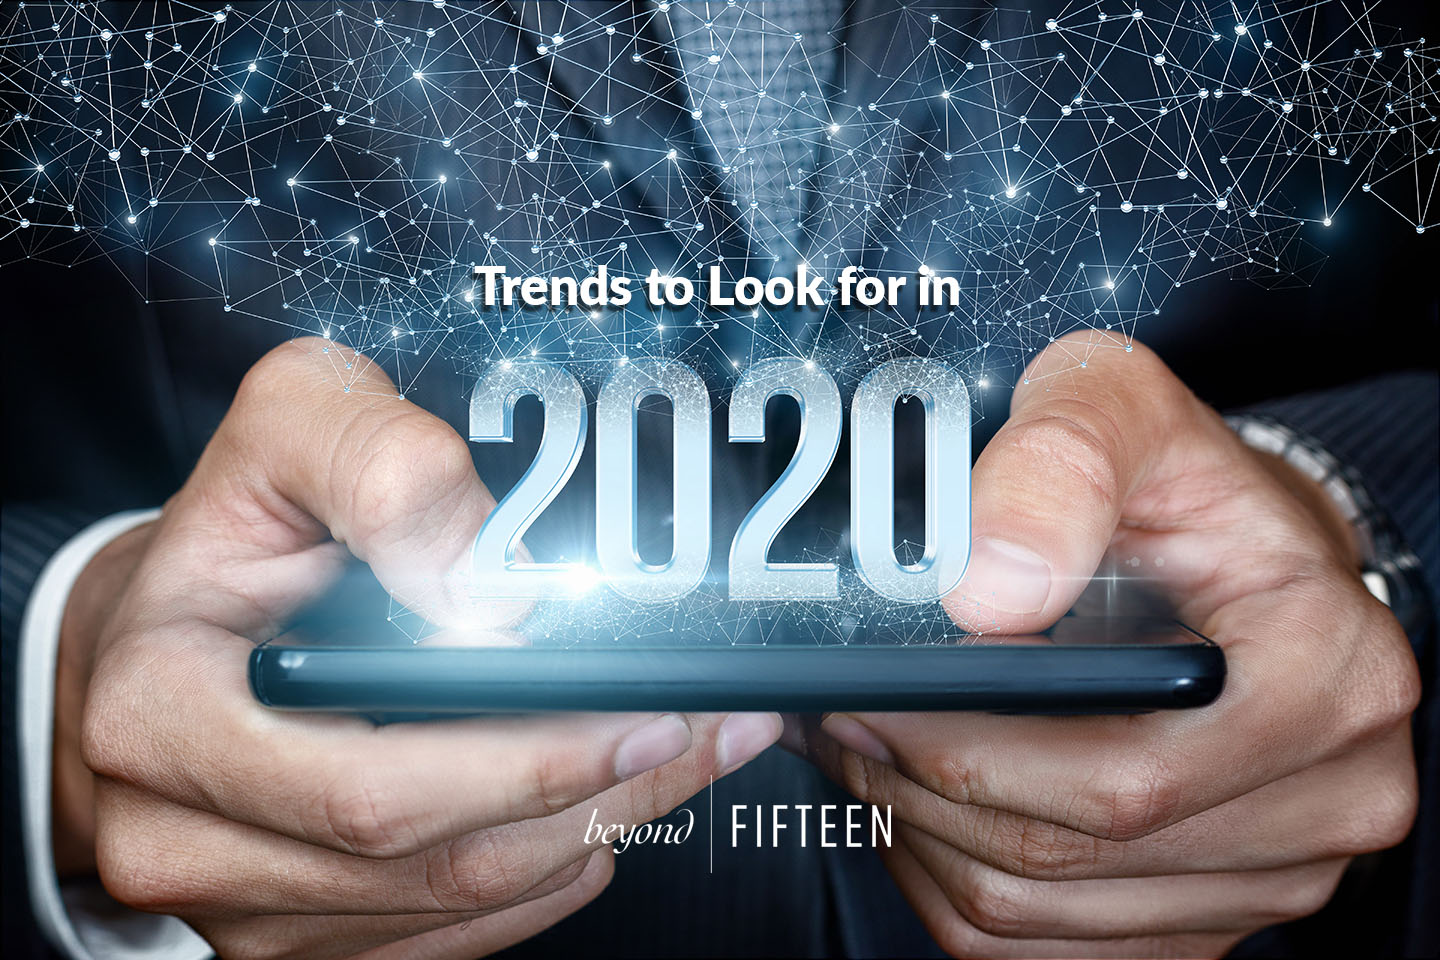 Trends to Look for in 2020